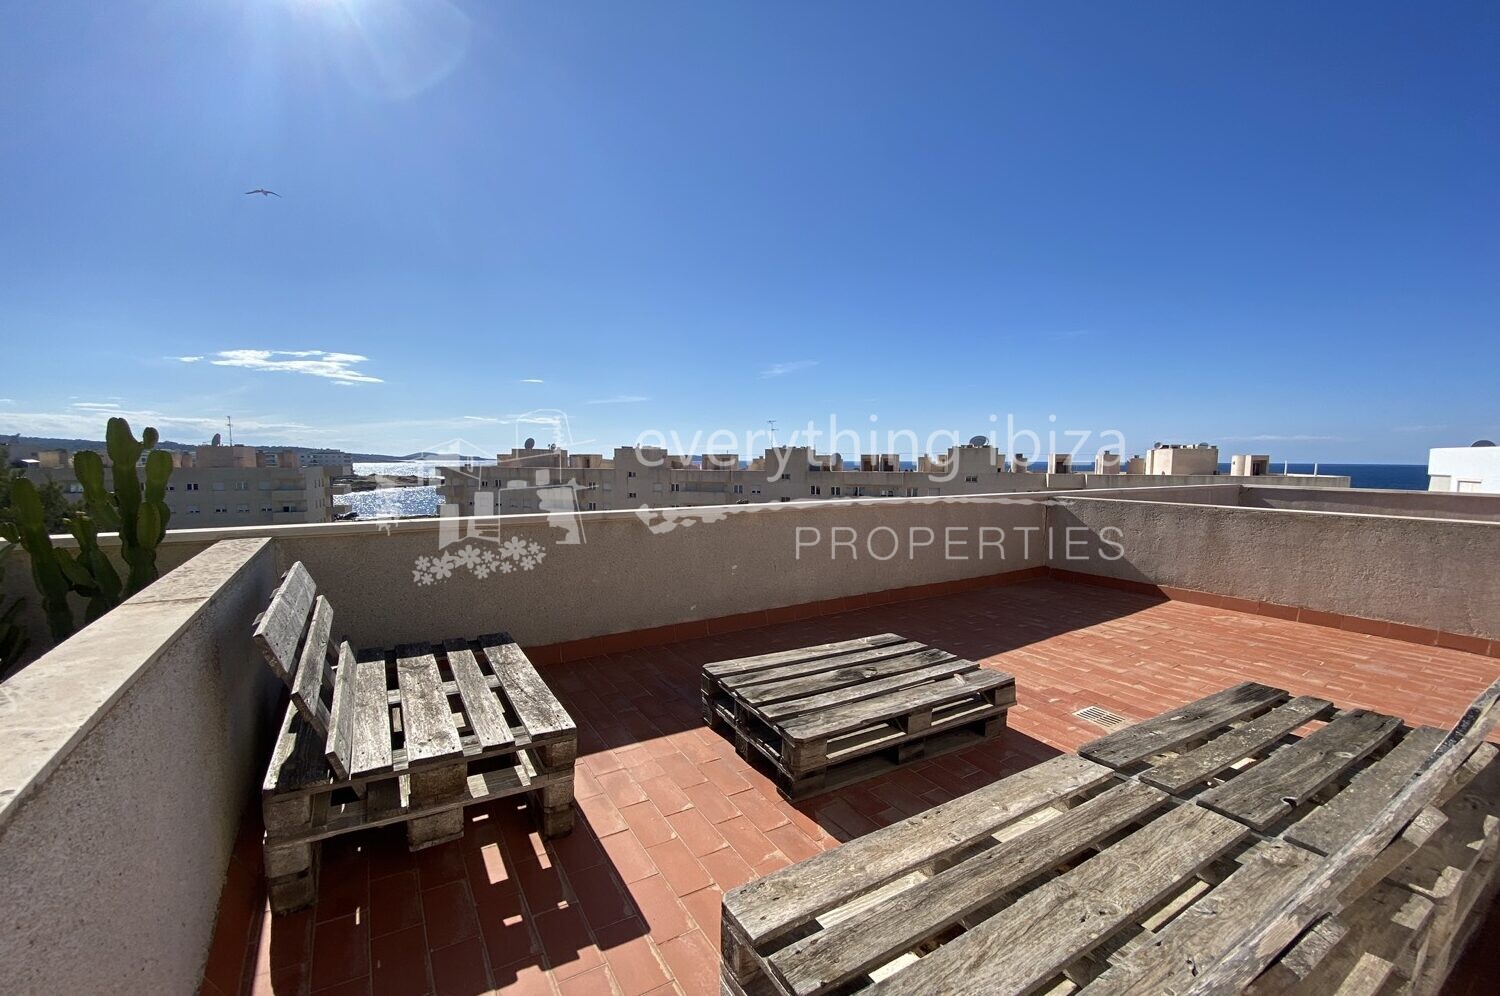 Penthouse apartment close to the sea, ref. 1336, for sale in Ibiza by everything ibiza Properties